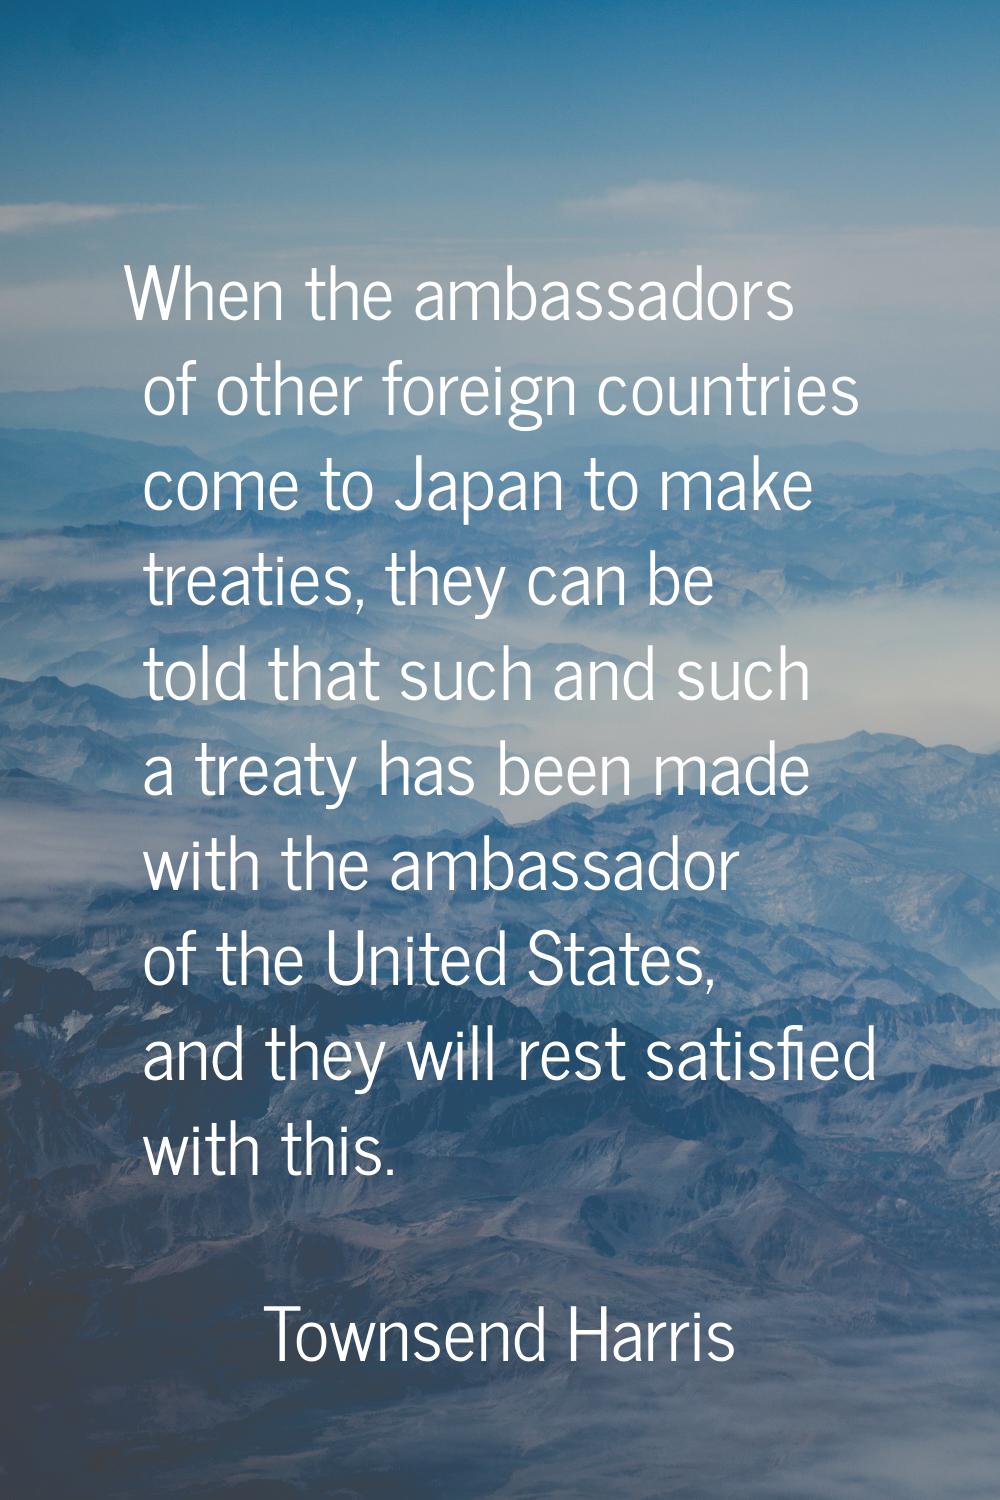 When the ambassadors of other foreign countries come to Japan to make treaties, they can be told th